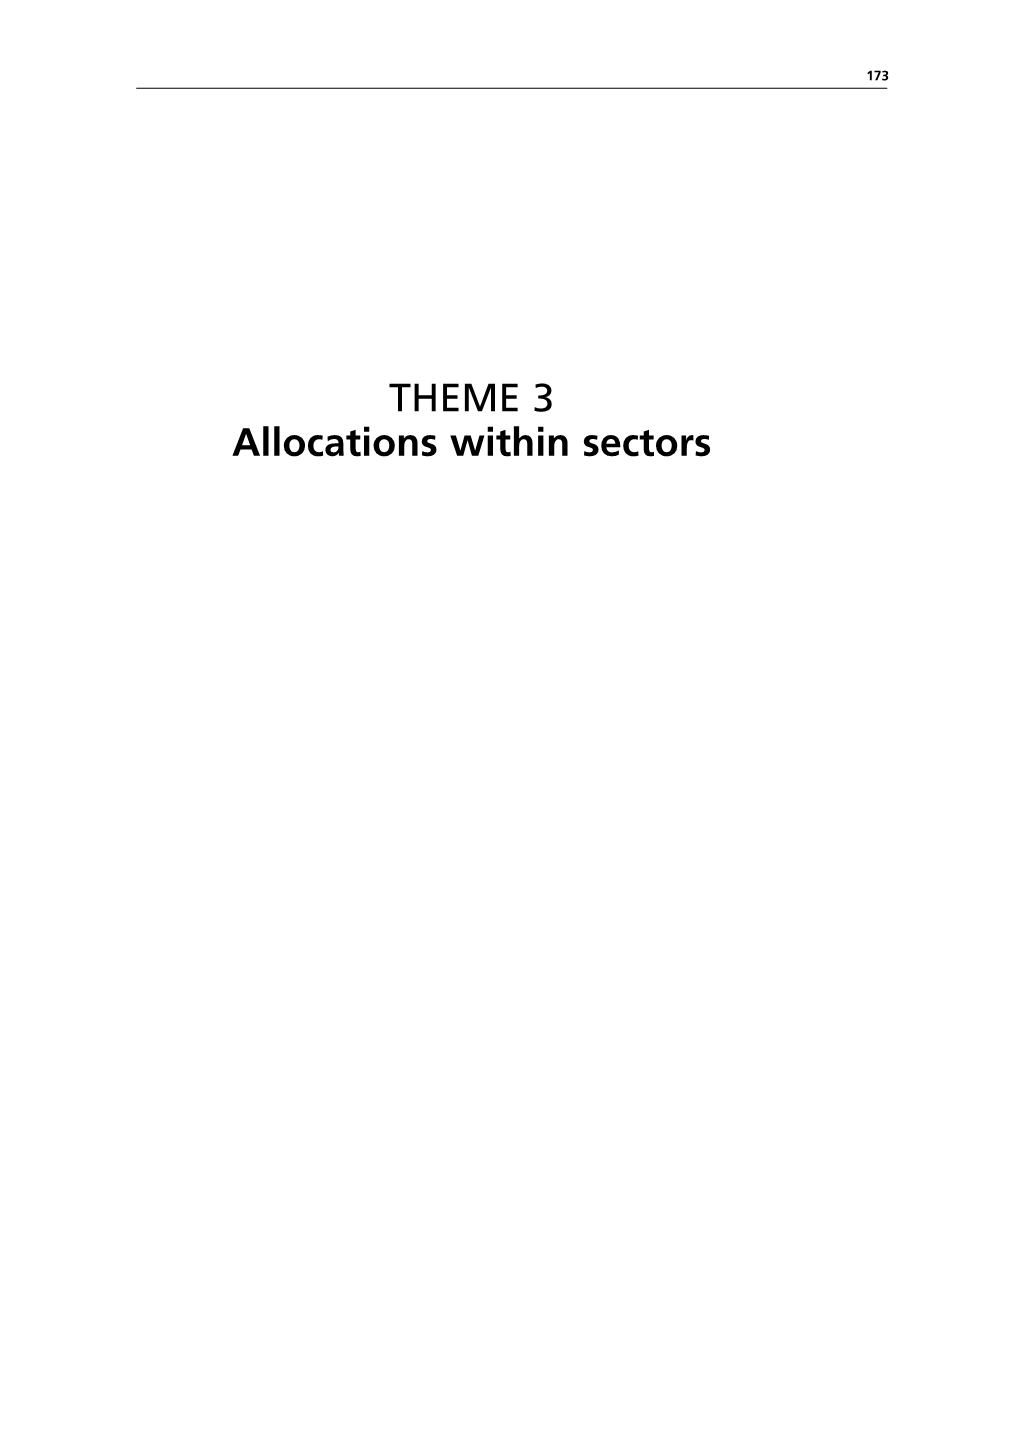 THEME 3 Allocations Within Sectors